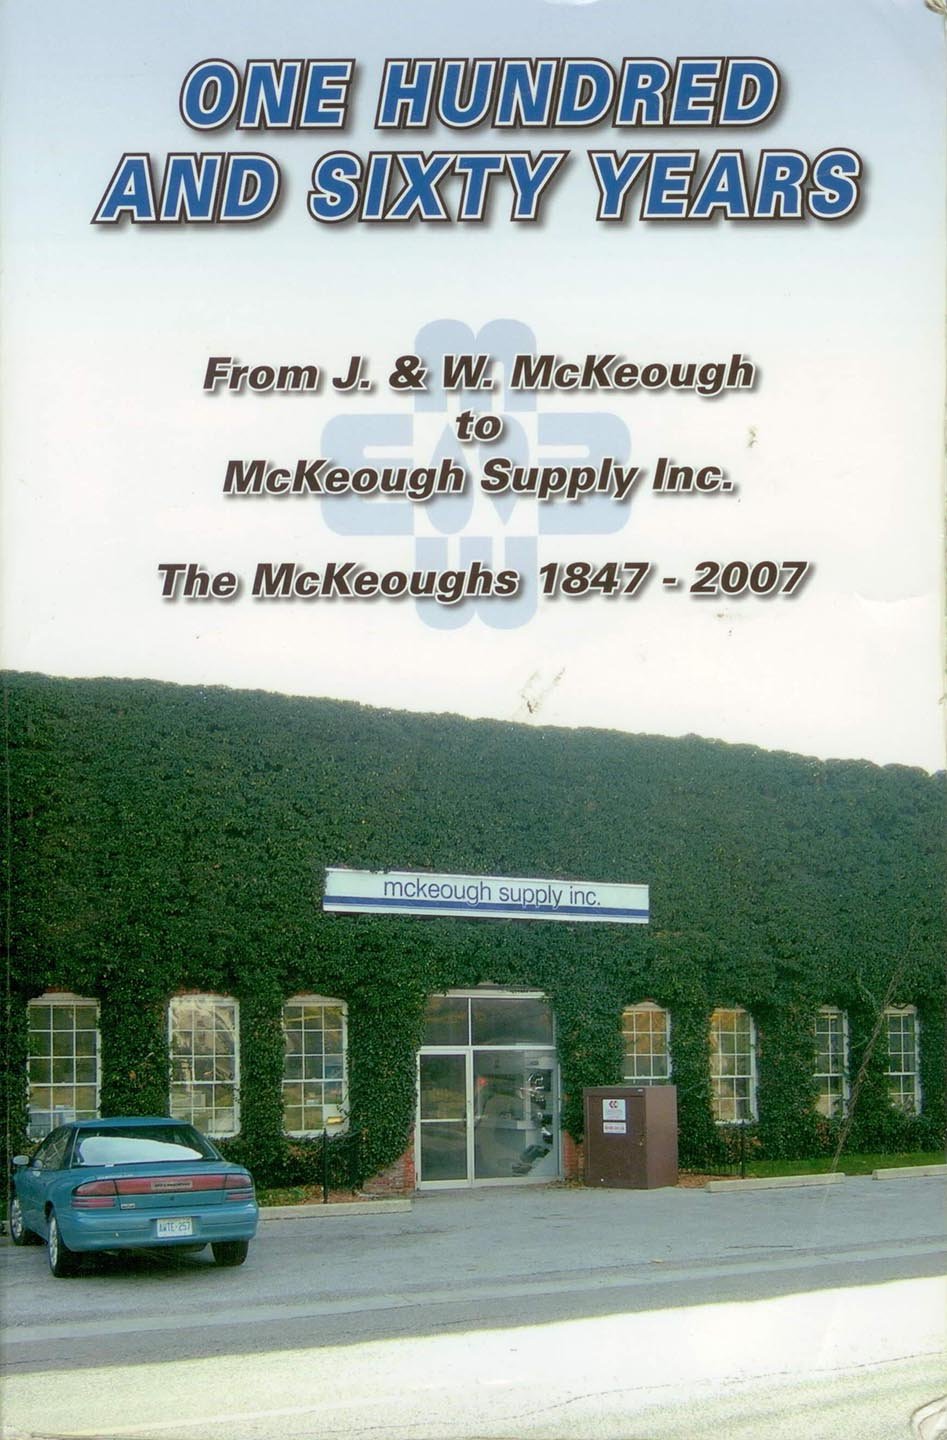 One Hundred and Sixty Years. From J. & W. McKeough to McKeough Supply Inc. The McKeoughs 1847-2007